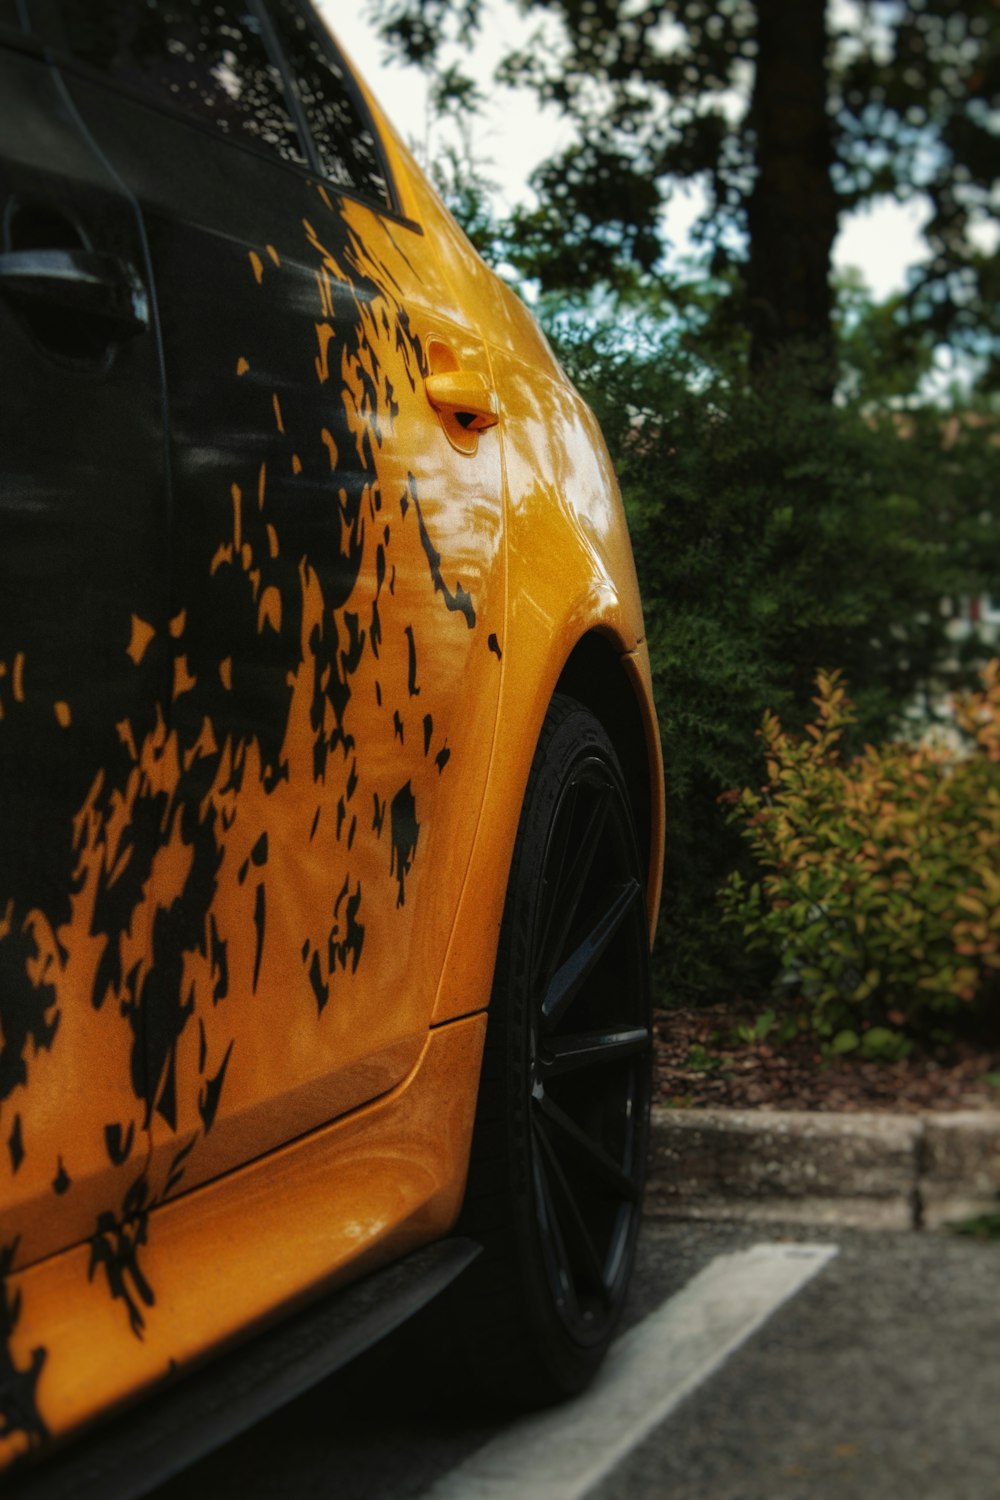 a close up of a yellow car parked in a parking lot